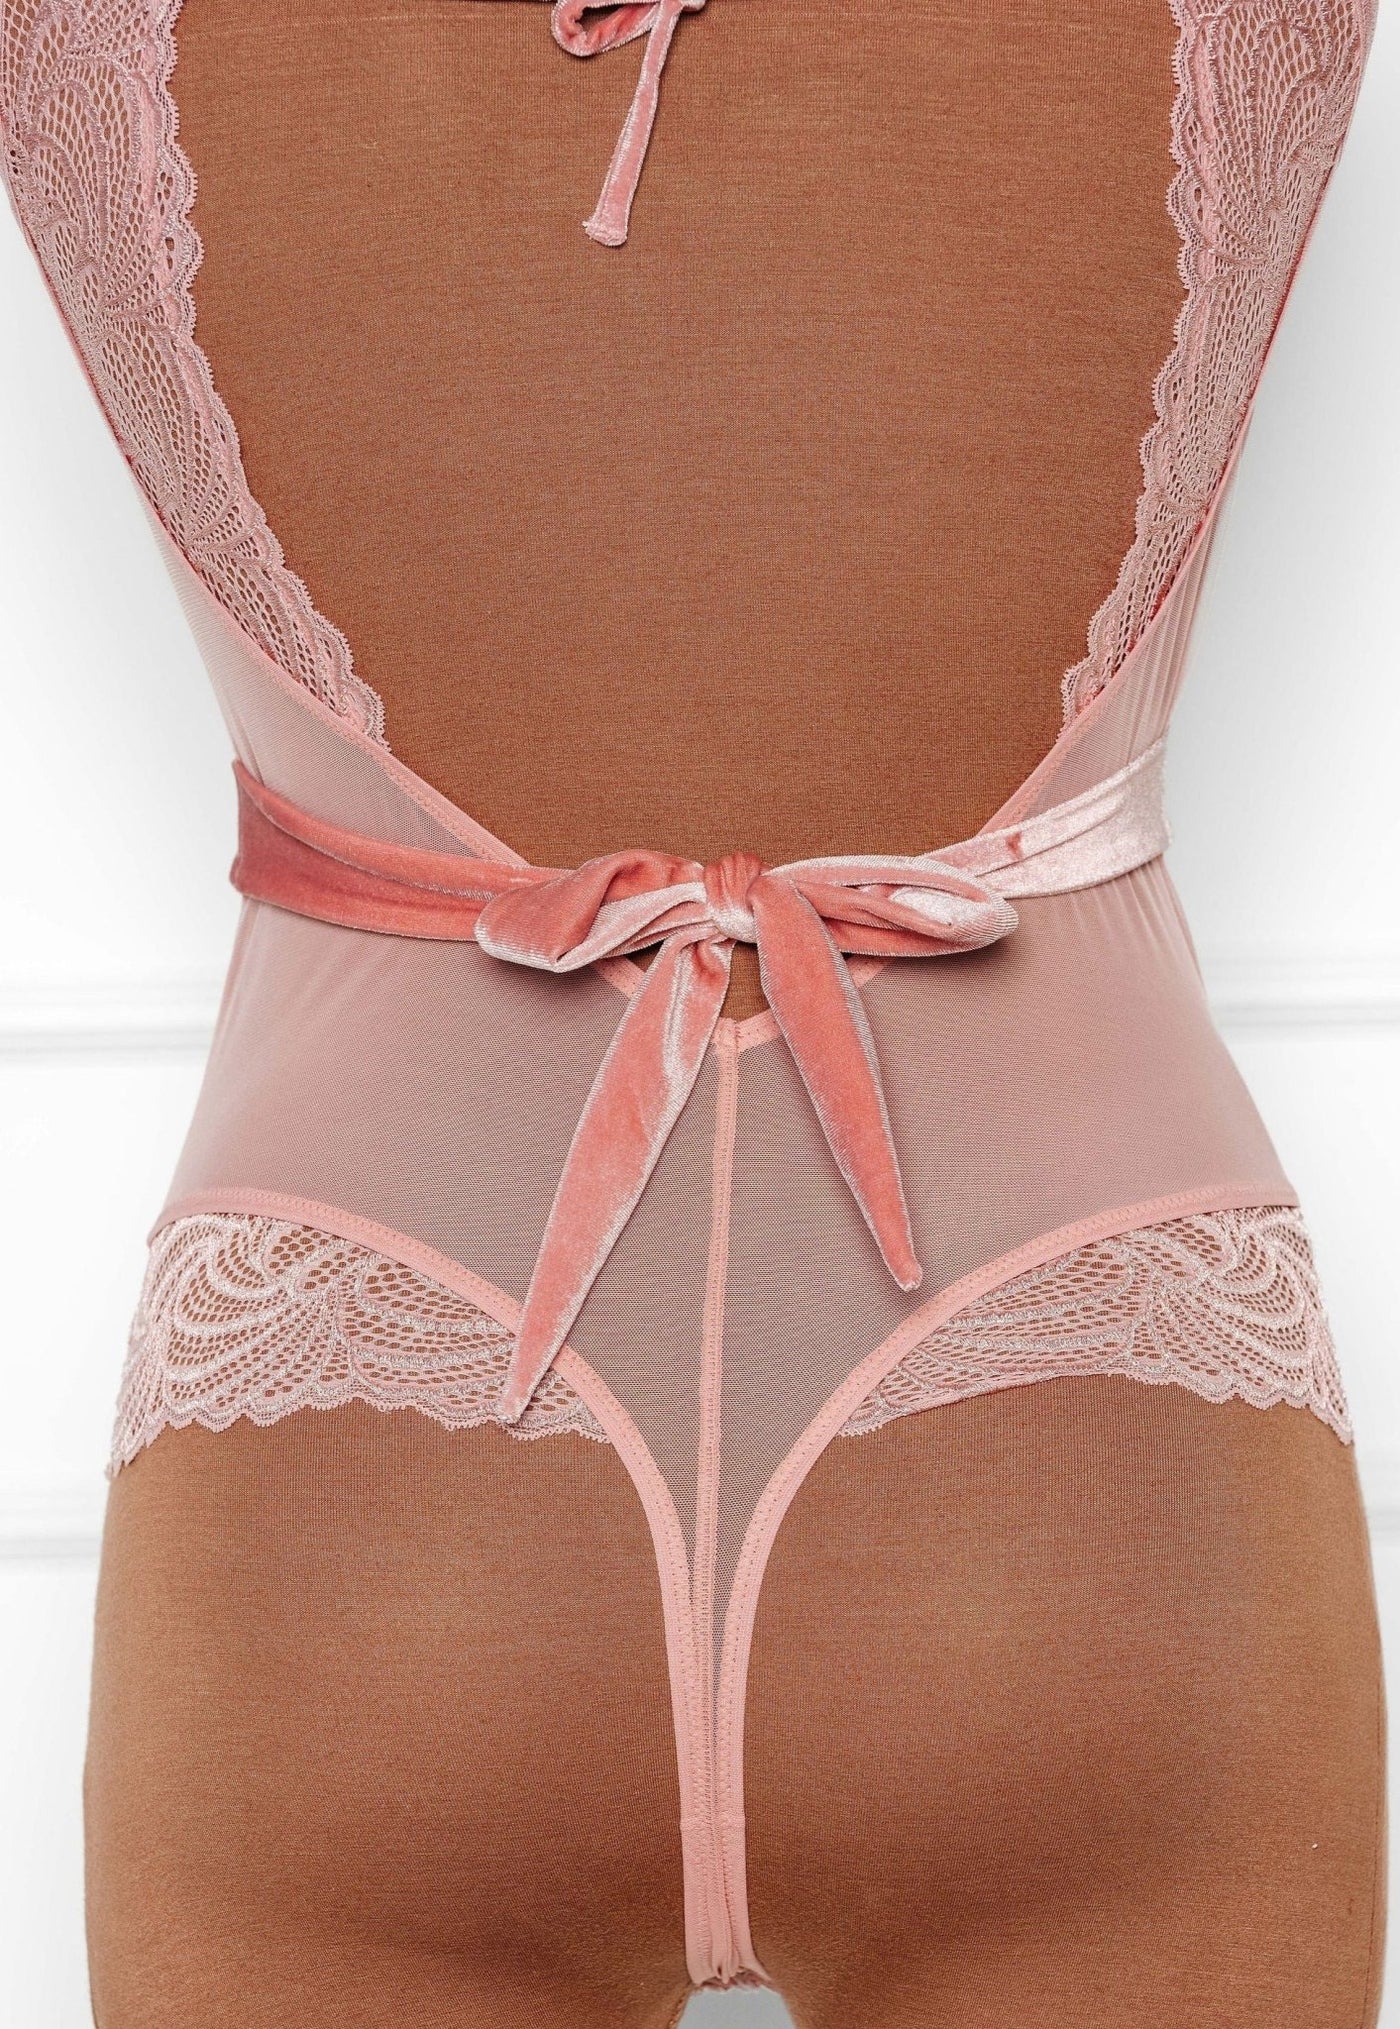 Lacy Plunge Teddy - Blush - Mentionables